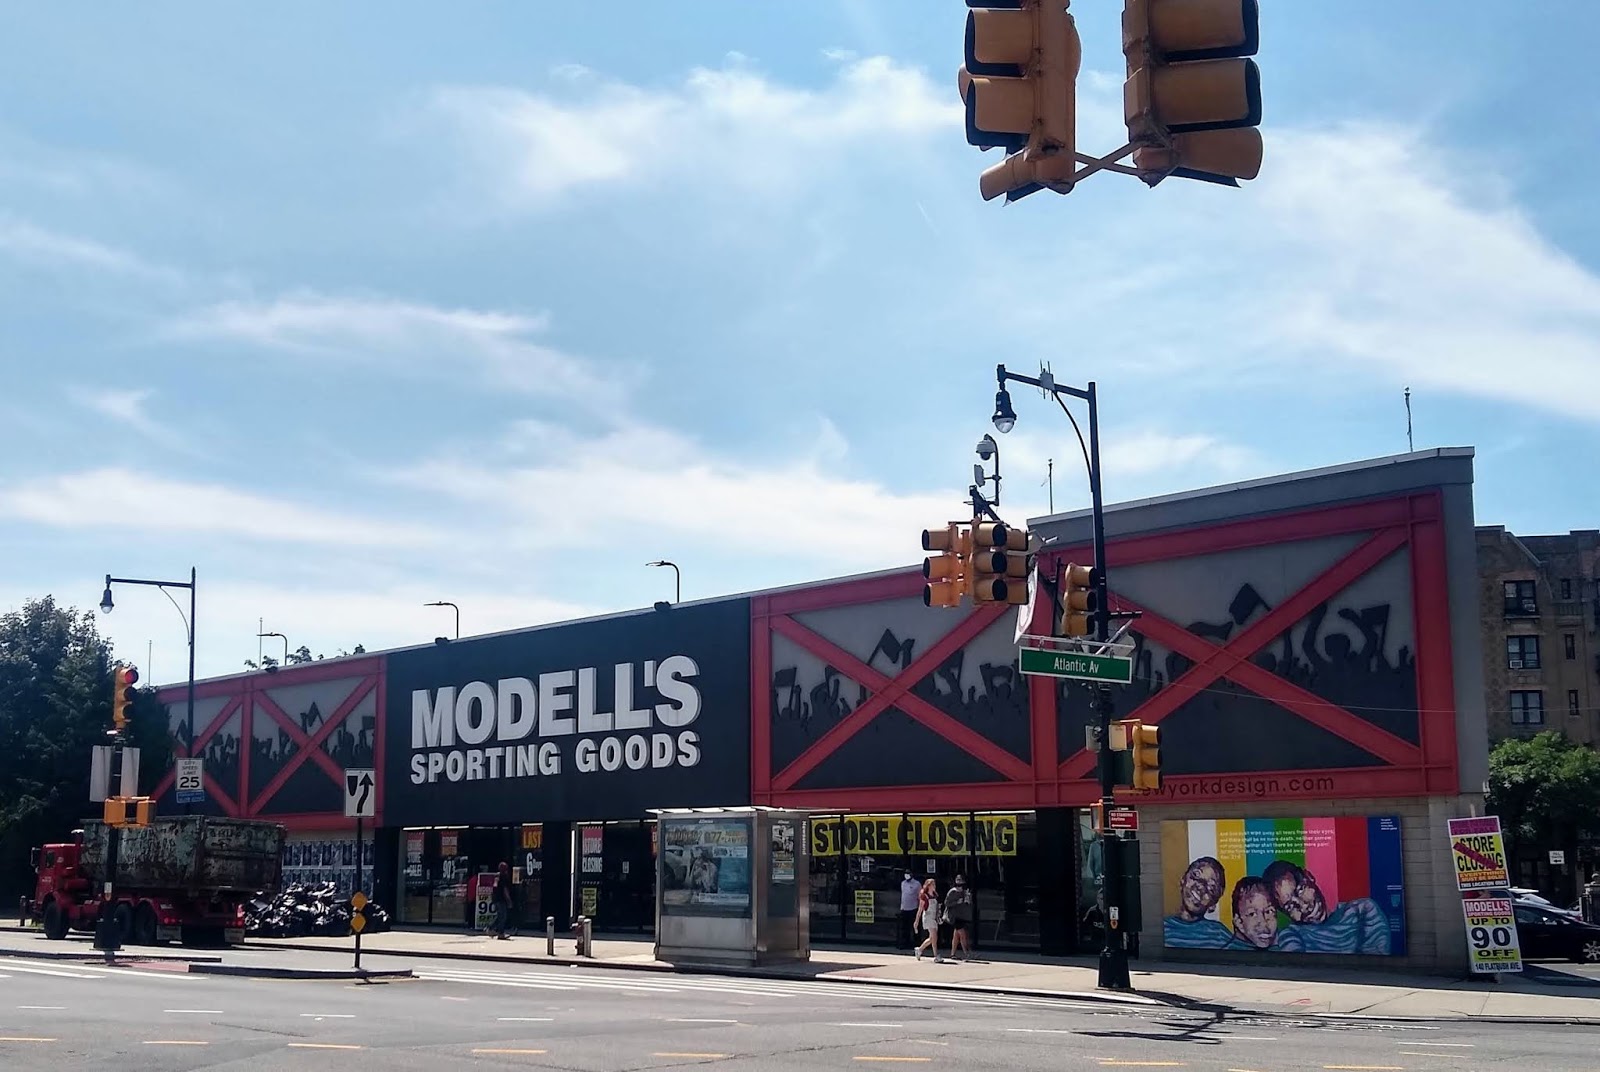 The Barclays Center team store moves to Flatbush Ave. and changes its name:  from Nets Shop by Adidas to Swag Shop to (apparently) Brooklyn Style